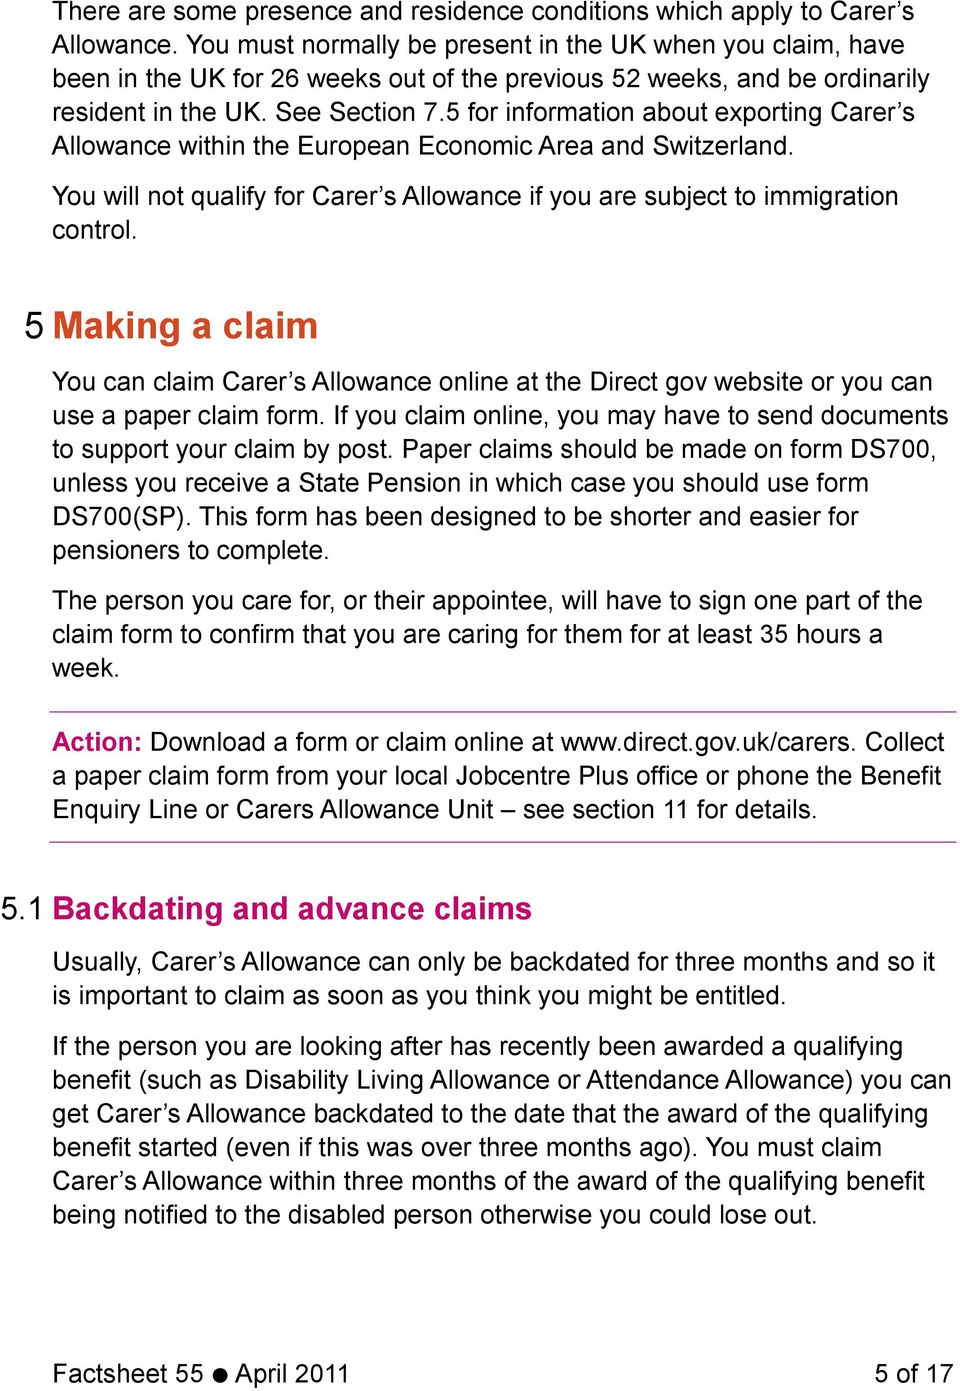 5 for information about exporting Carer s Allowance within the European Economic Area and Switzerland. You will not qualify for Carer s Allowance if you are subject to immigration control.